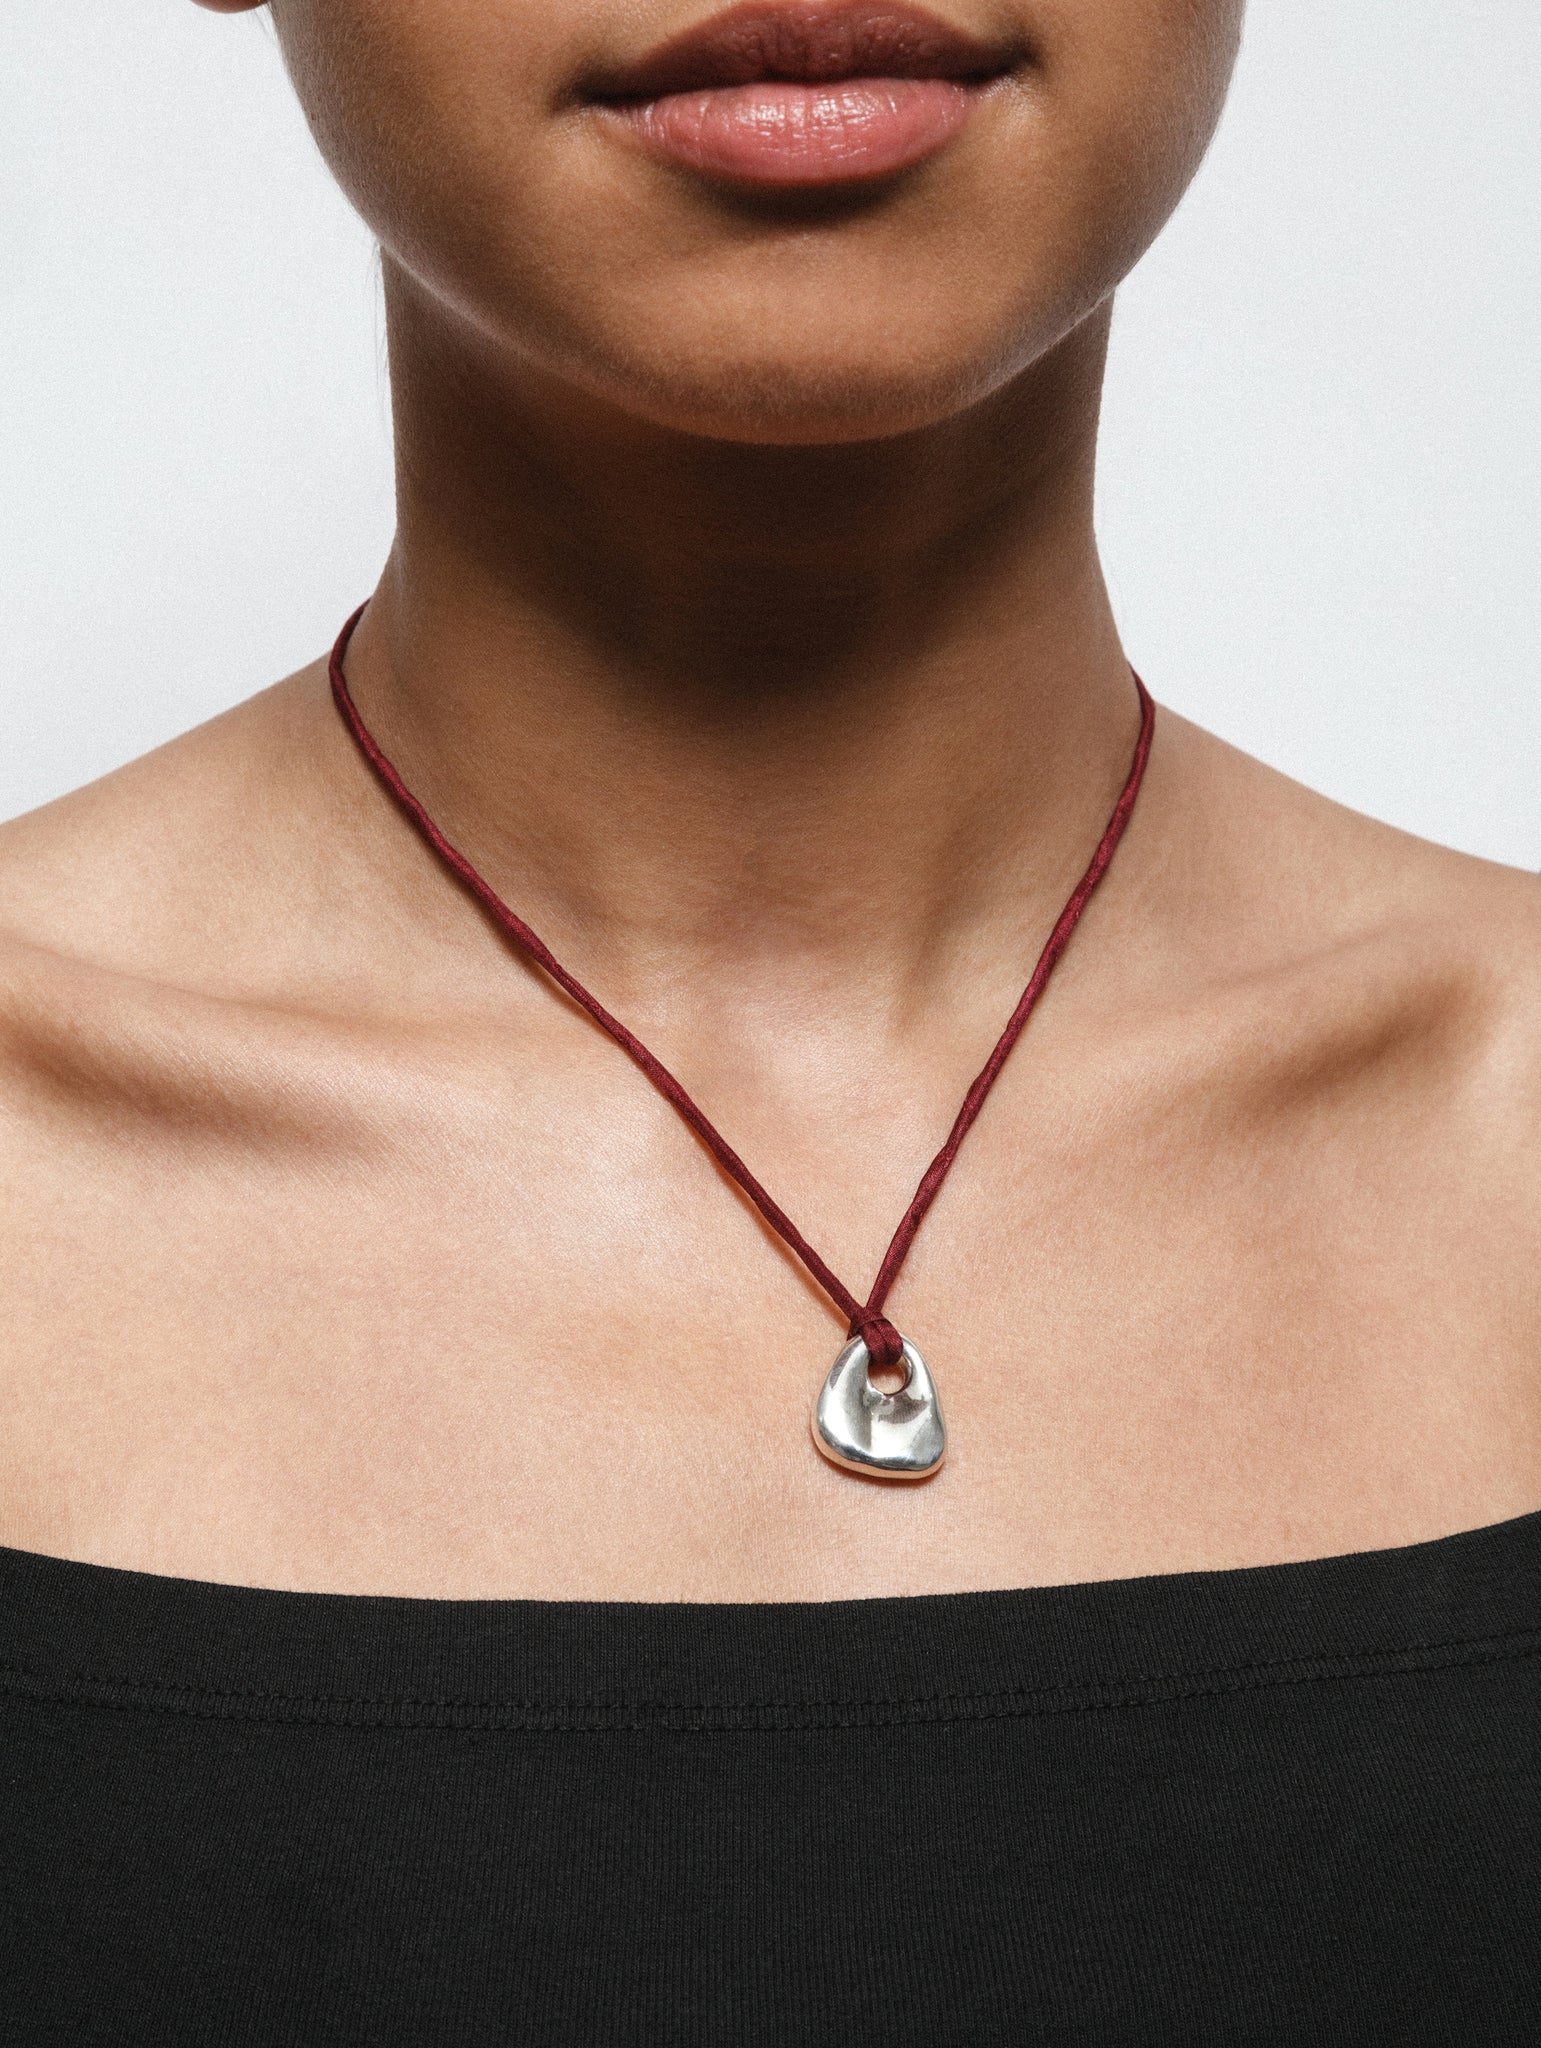 Wolf Circus Cord Necklace Choker with Statement Pendant Silver Jewelry